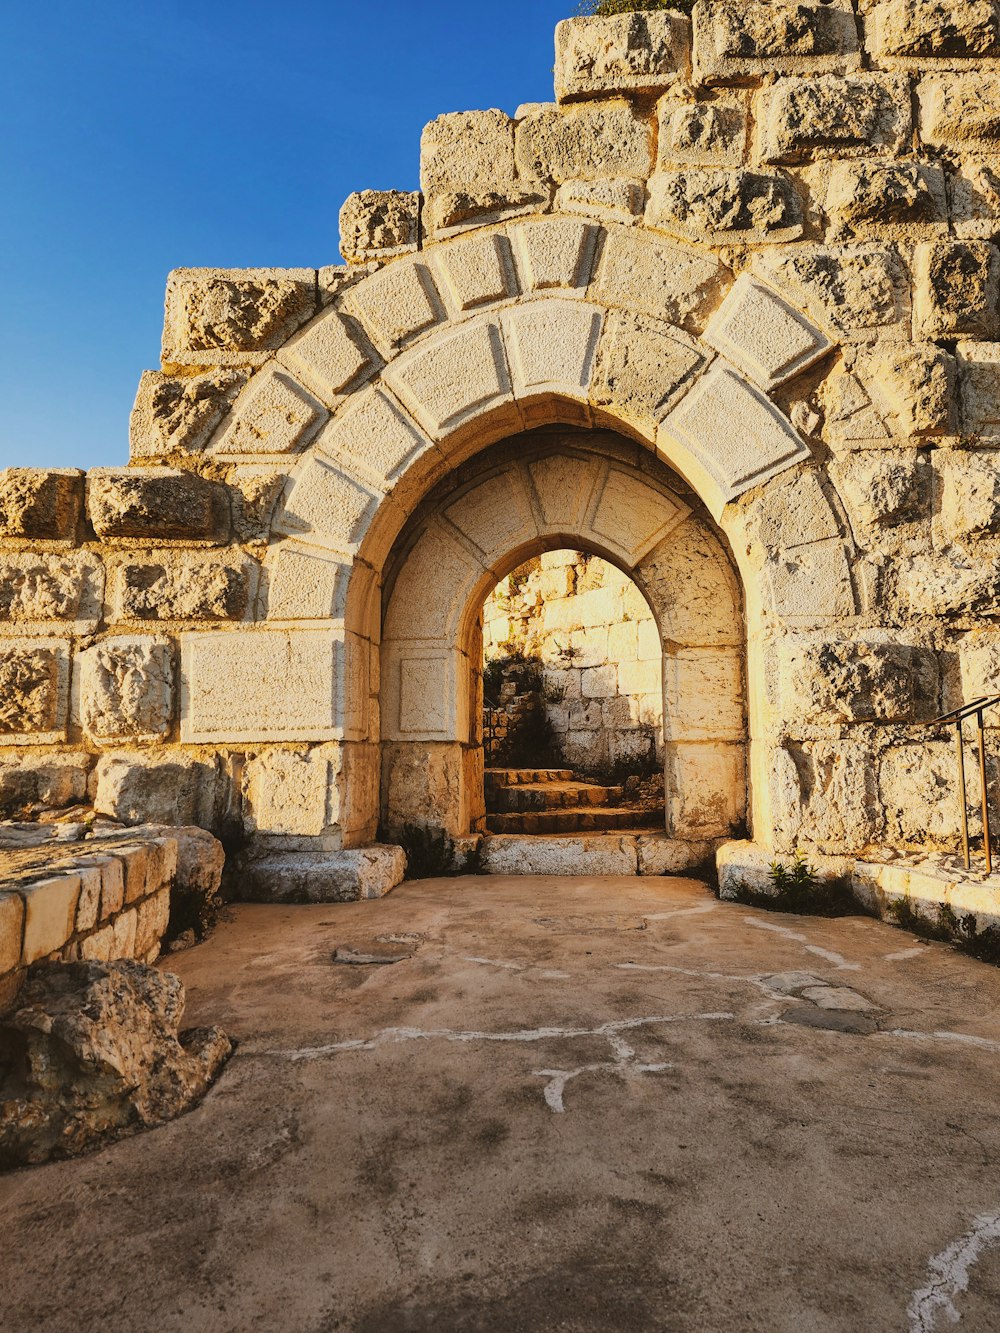 a stone archway in a stone wall with a blue sky in the background